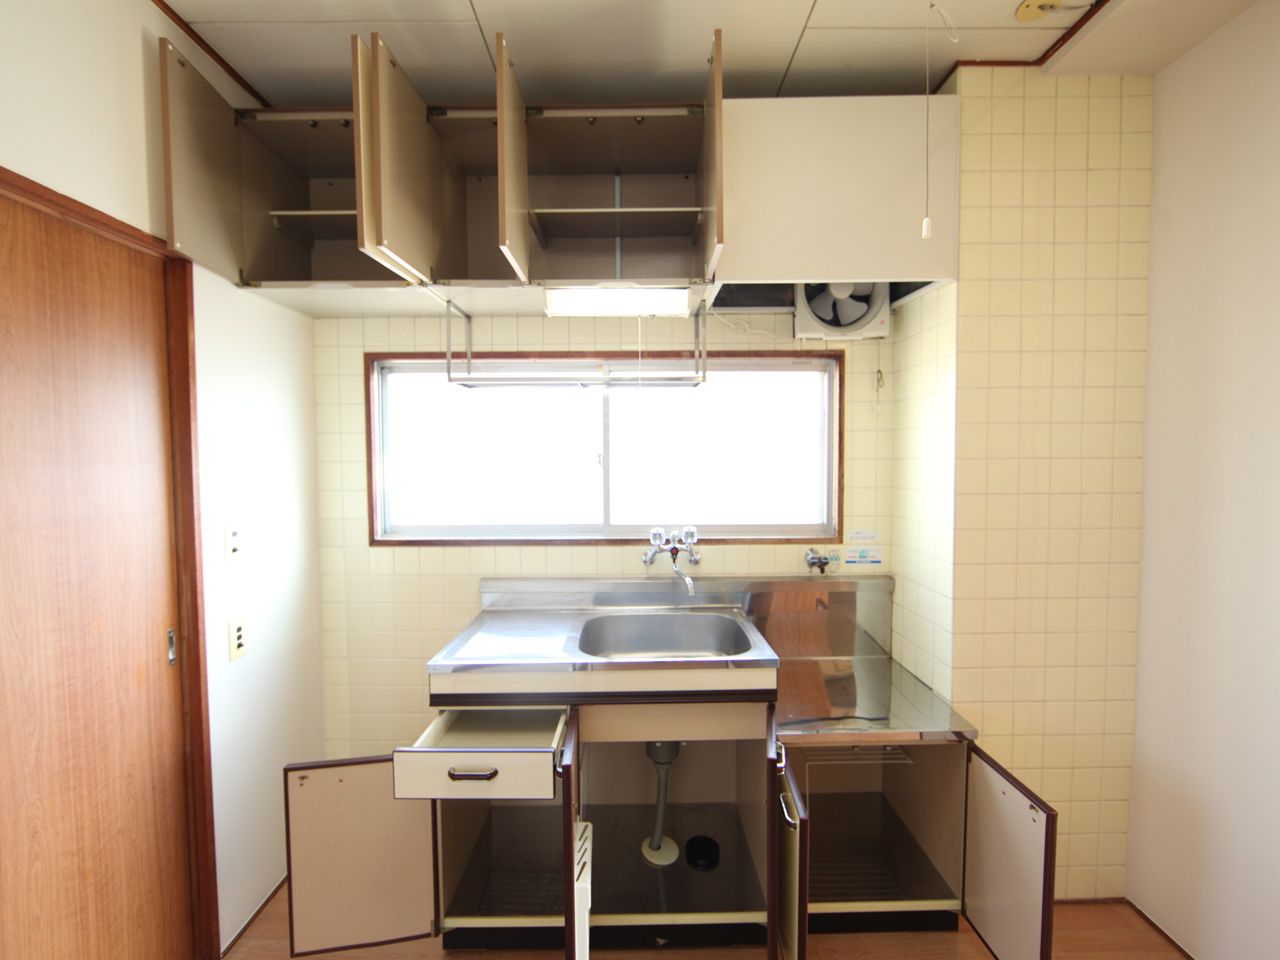 Kitchen. Kitchen (gas two-burner stove installation possible) with a window (ventilation good)